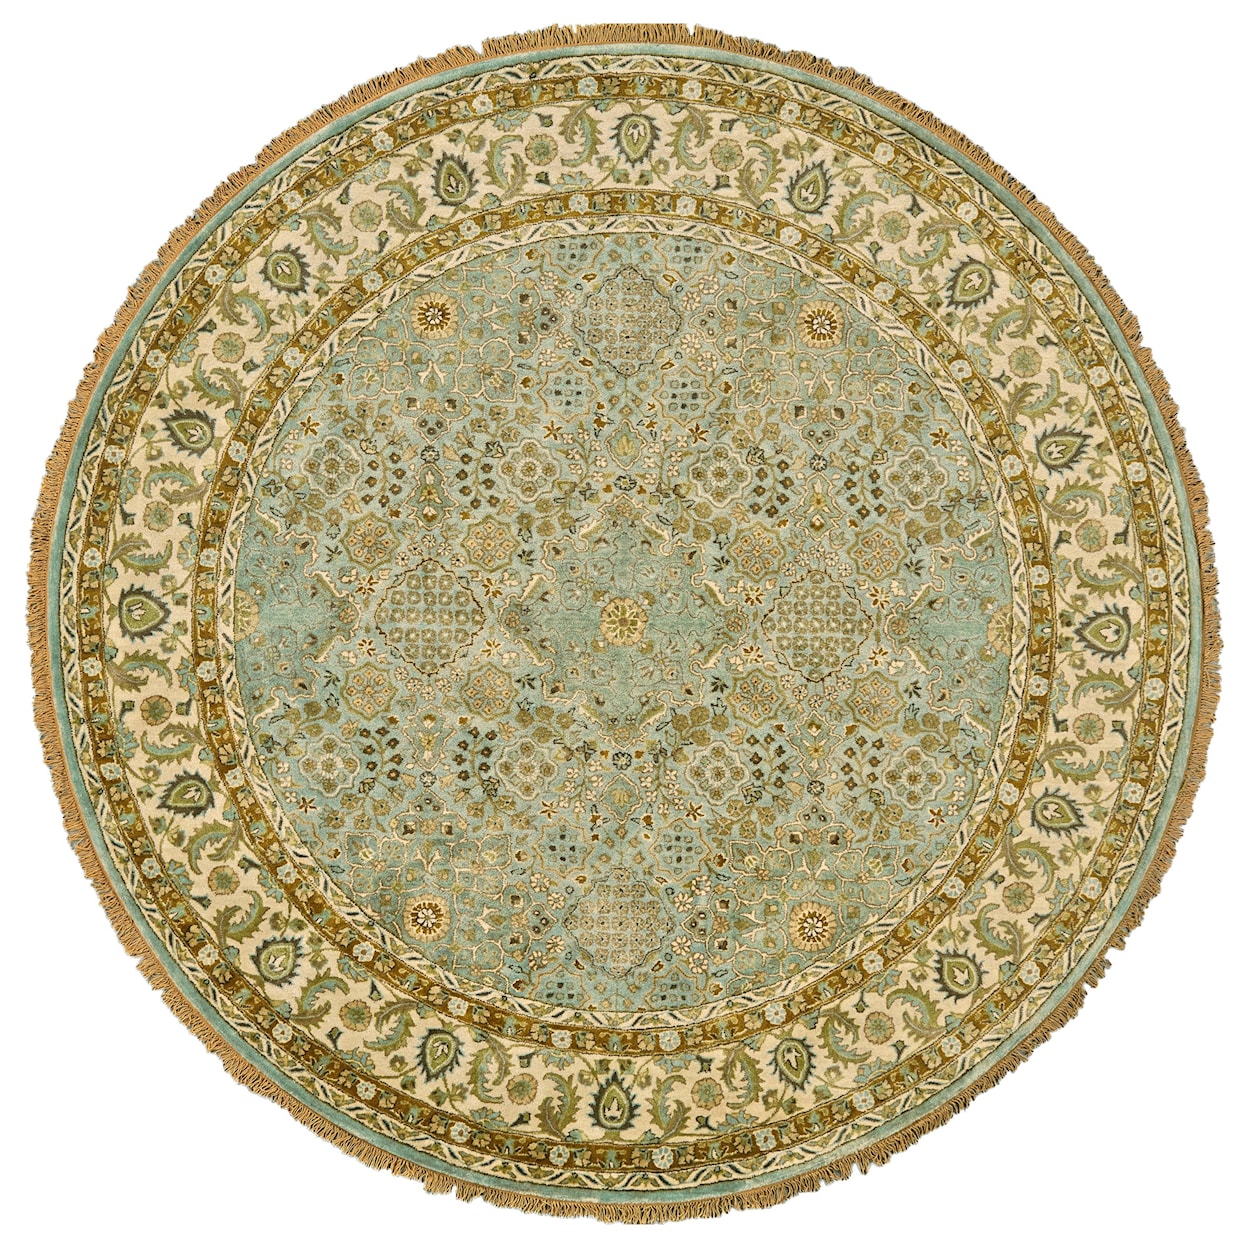 Feizy Rugs Amore Ocean/Beige 8' x 8' Round Area Rug